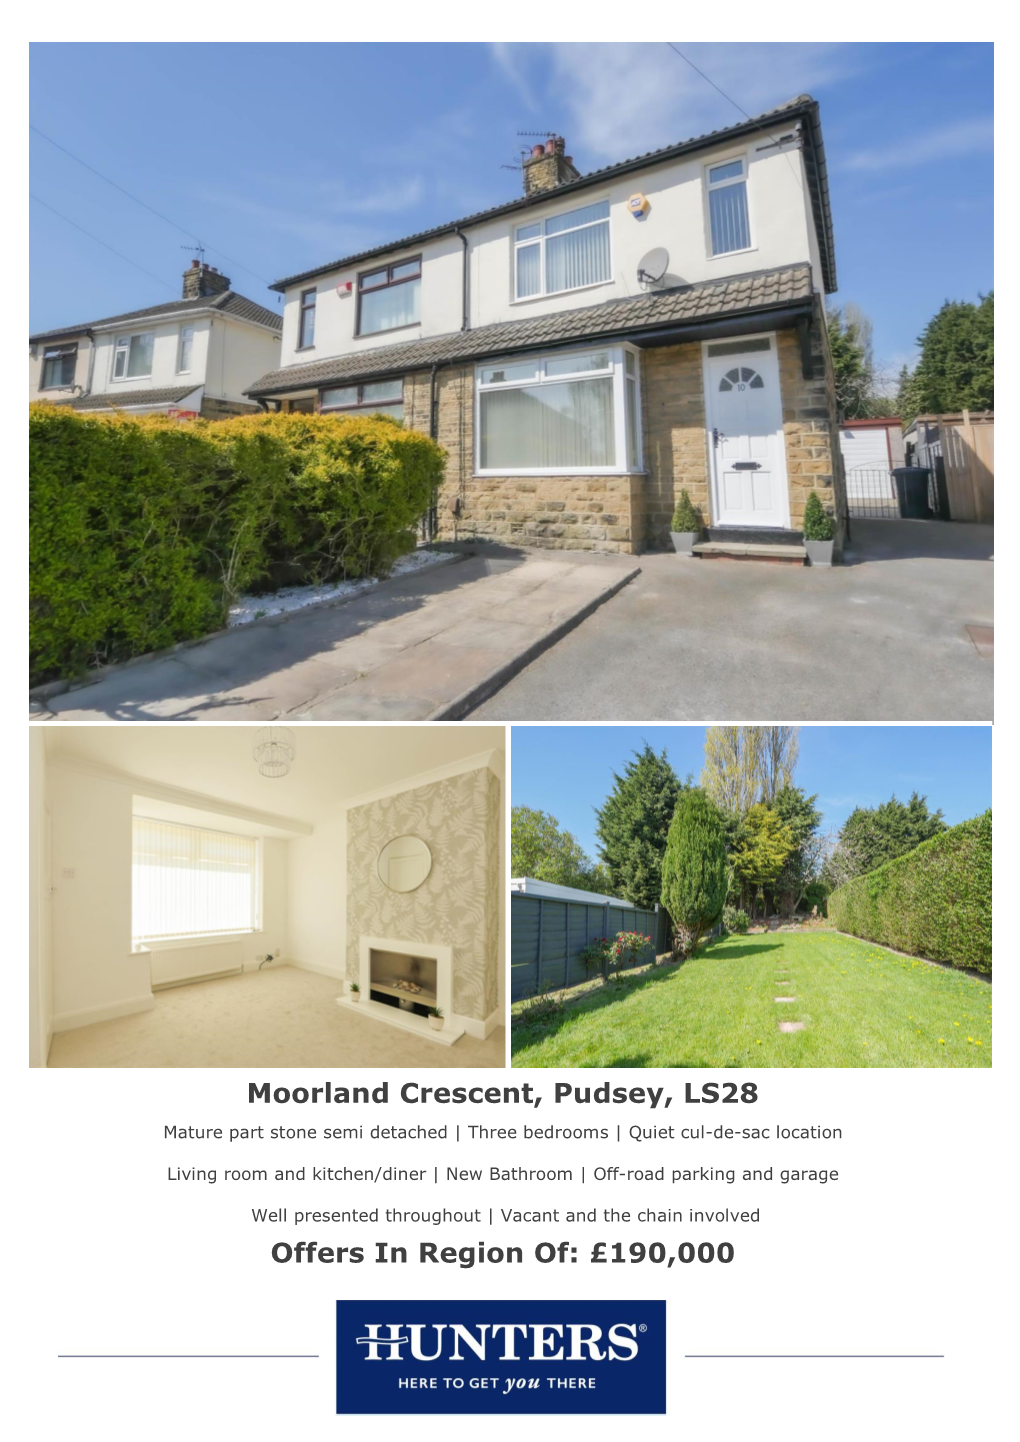 Moorland Crescent, Pudsey, LS28 Offers in Region Of